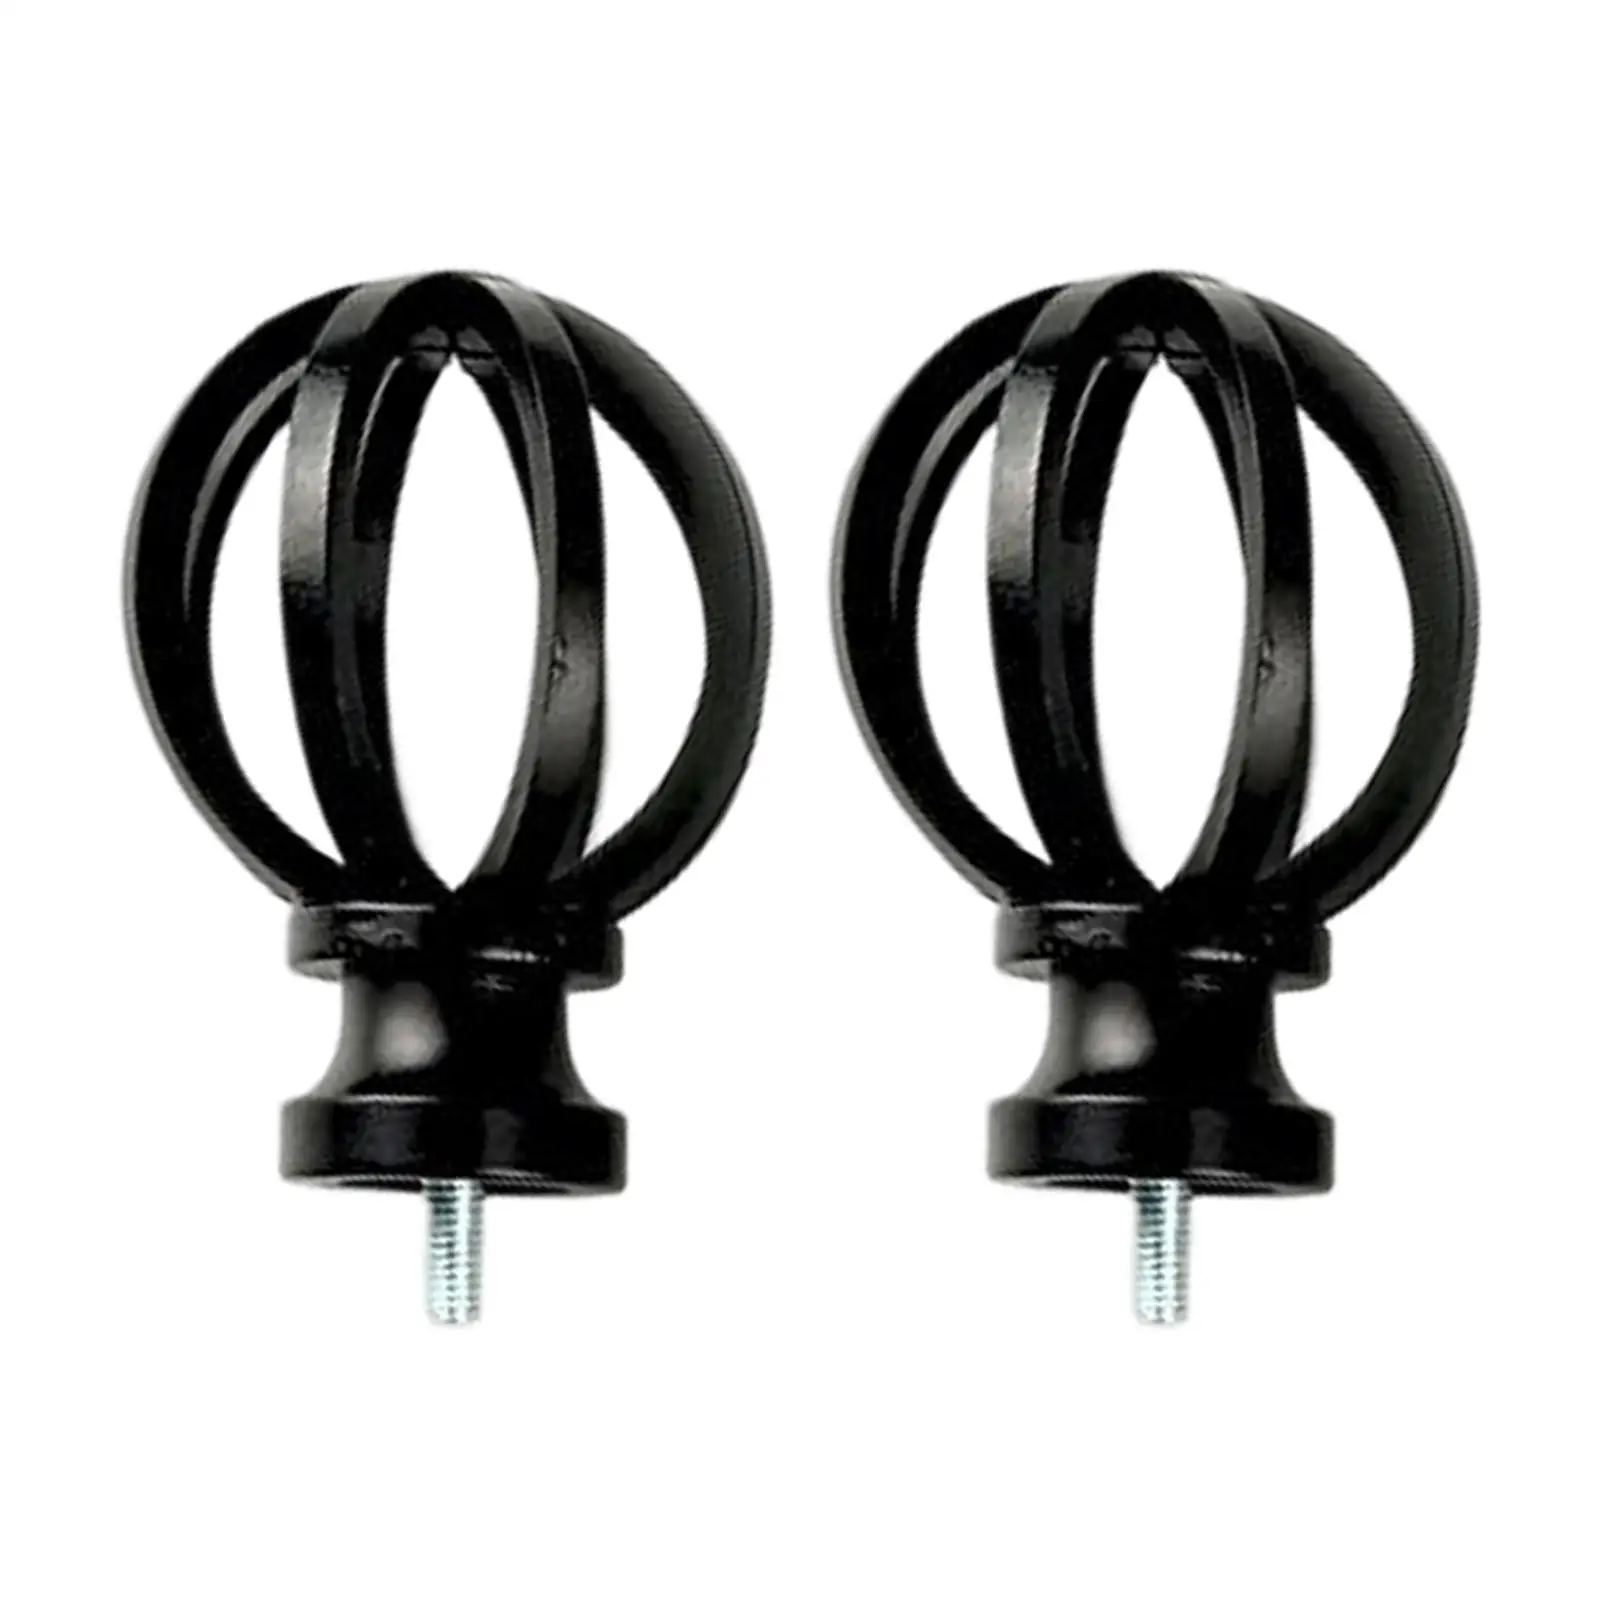 2x Cage Replacement Curtain Rod Finials 5/8 inch Decoration Vintage Accessories Drapery Rod Finials for Bathroom Home Office